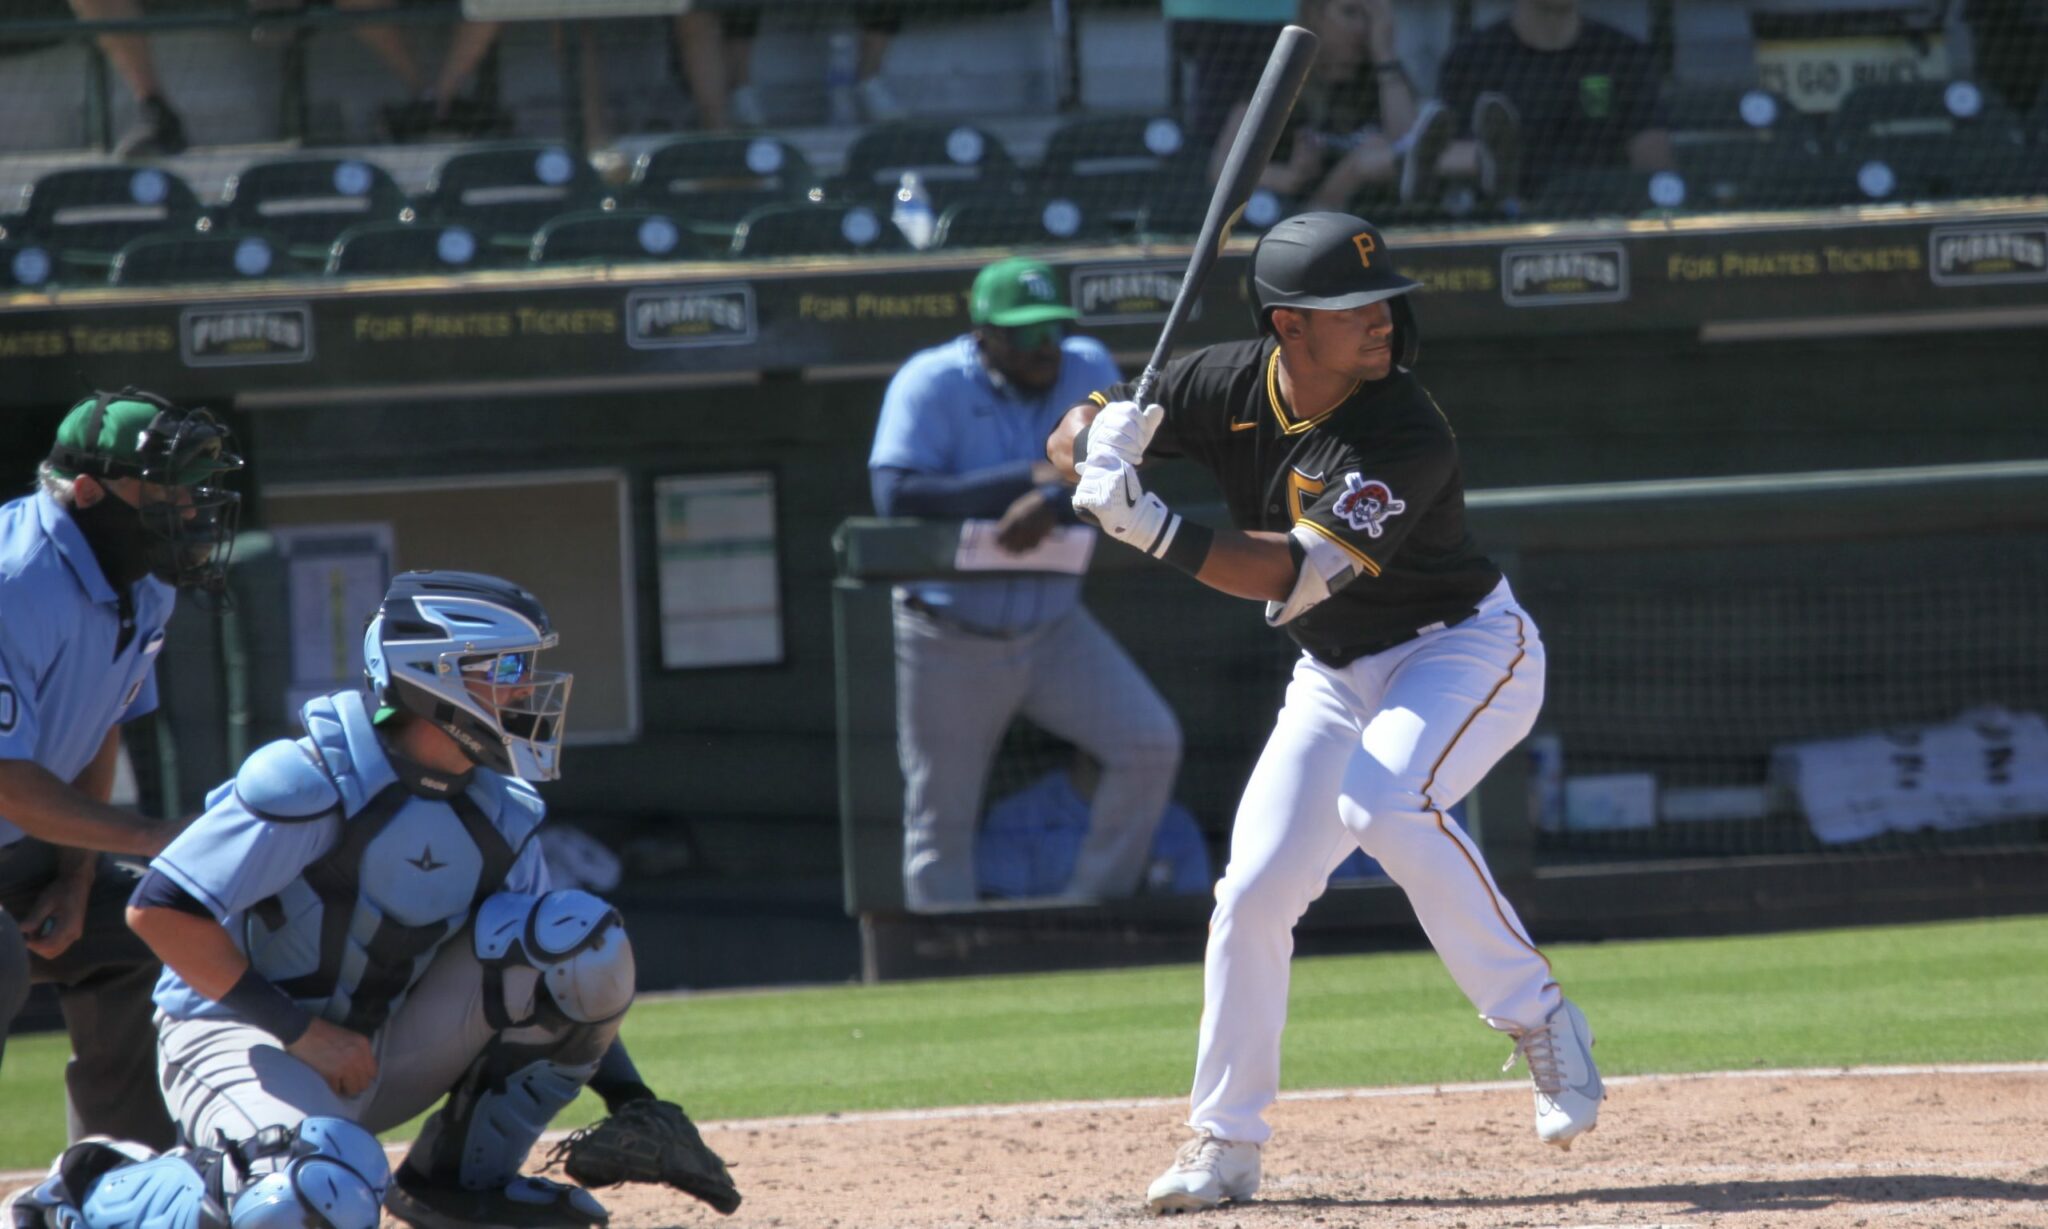 AFL Recap: Peoria Goes Winless in the First Week of Action